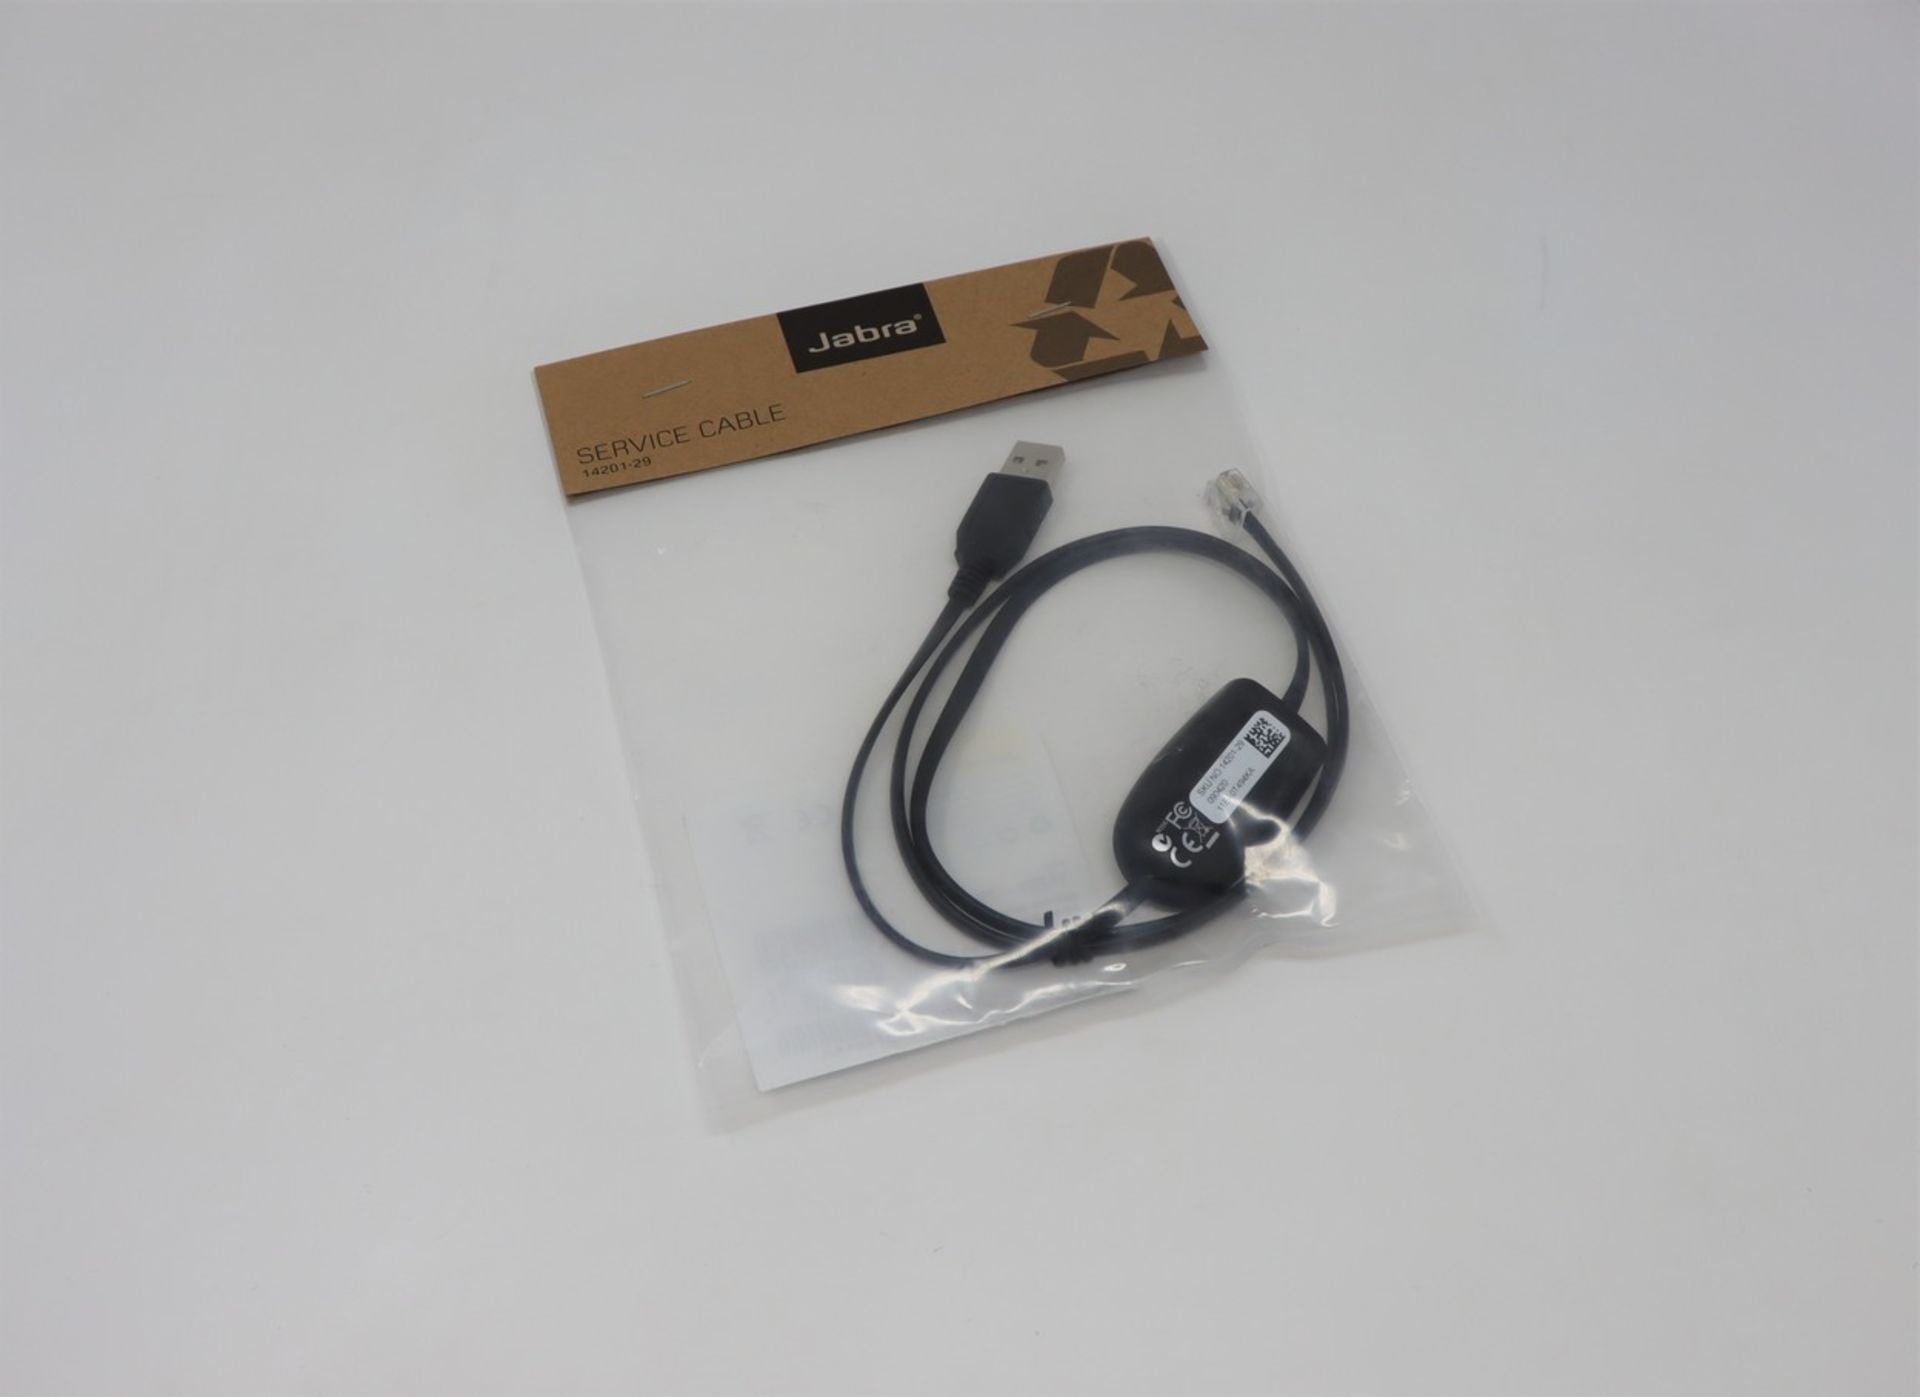 An as new Jabra 14201-29 Pro 920 Service Cable (Packaging sealed).